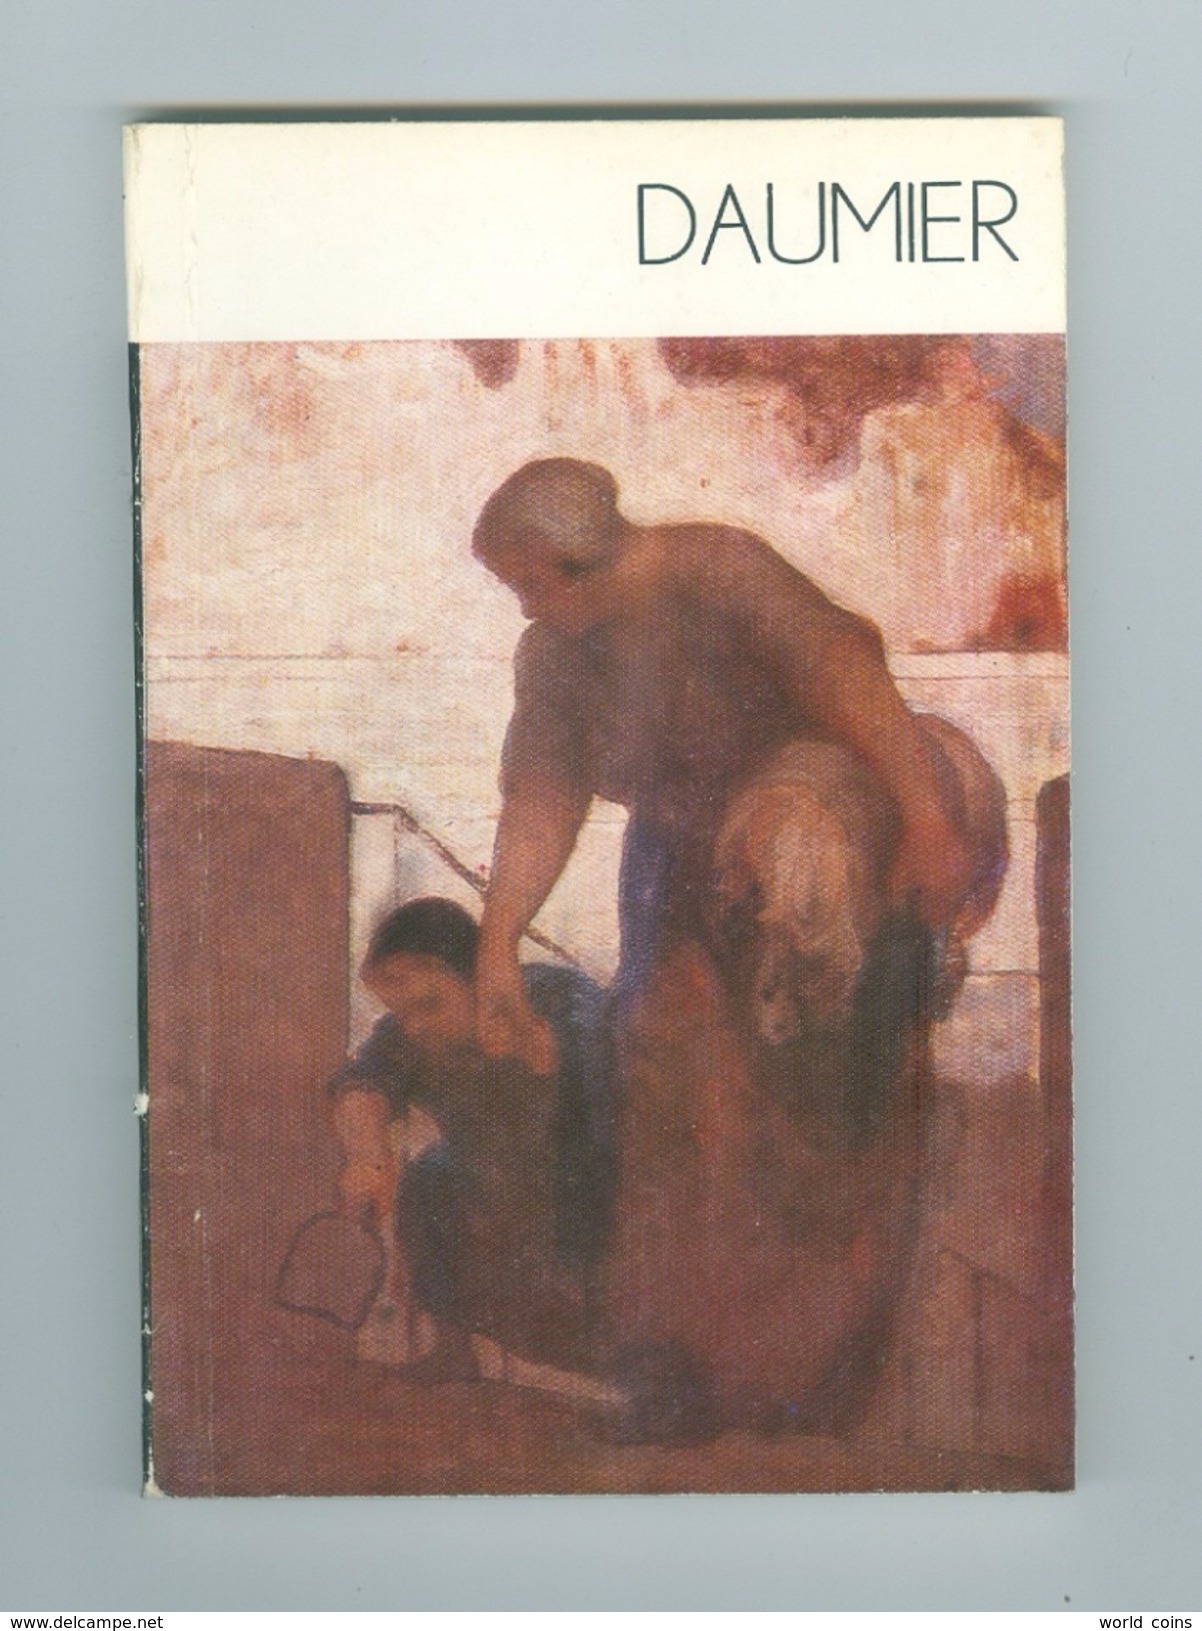 Daumier  (1808–1879), A French Printmaker, Caricaturist, Painter, And Sculptor. Paperback Book. - Painting & Sculpting